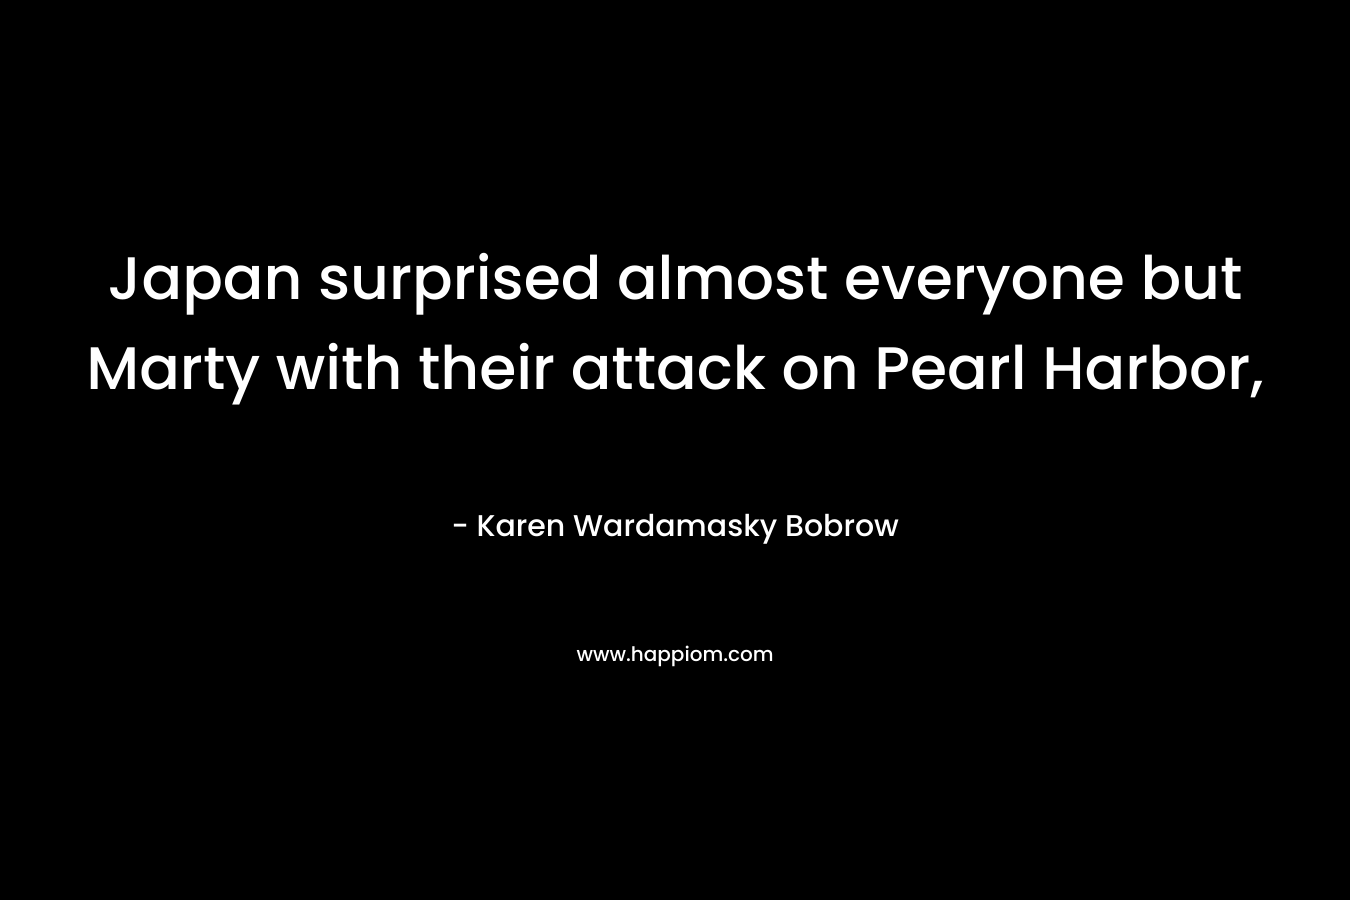 Japan surprised almost everyone but Marty with their attack on Pearl Harbor, – Karen Wardamasky Bobrow